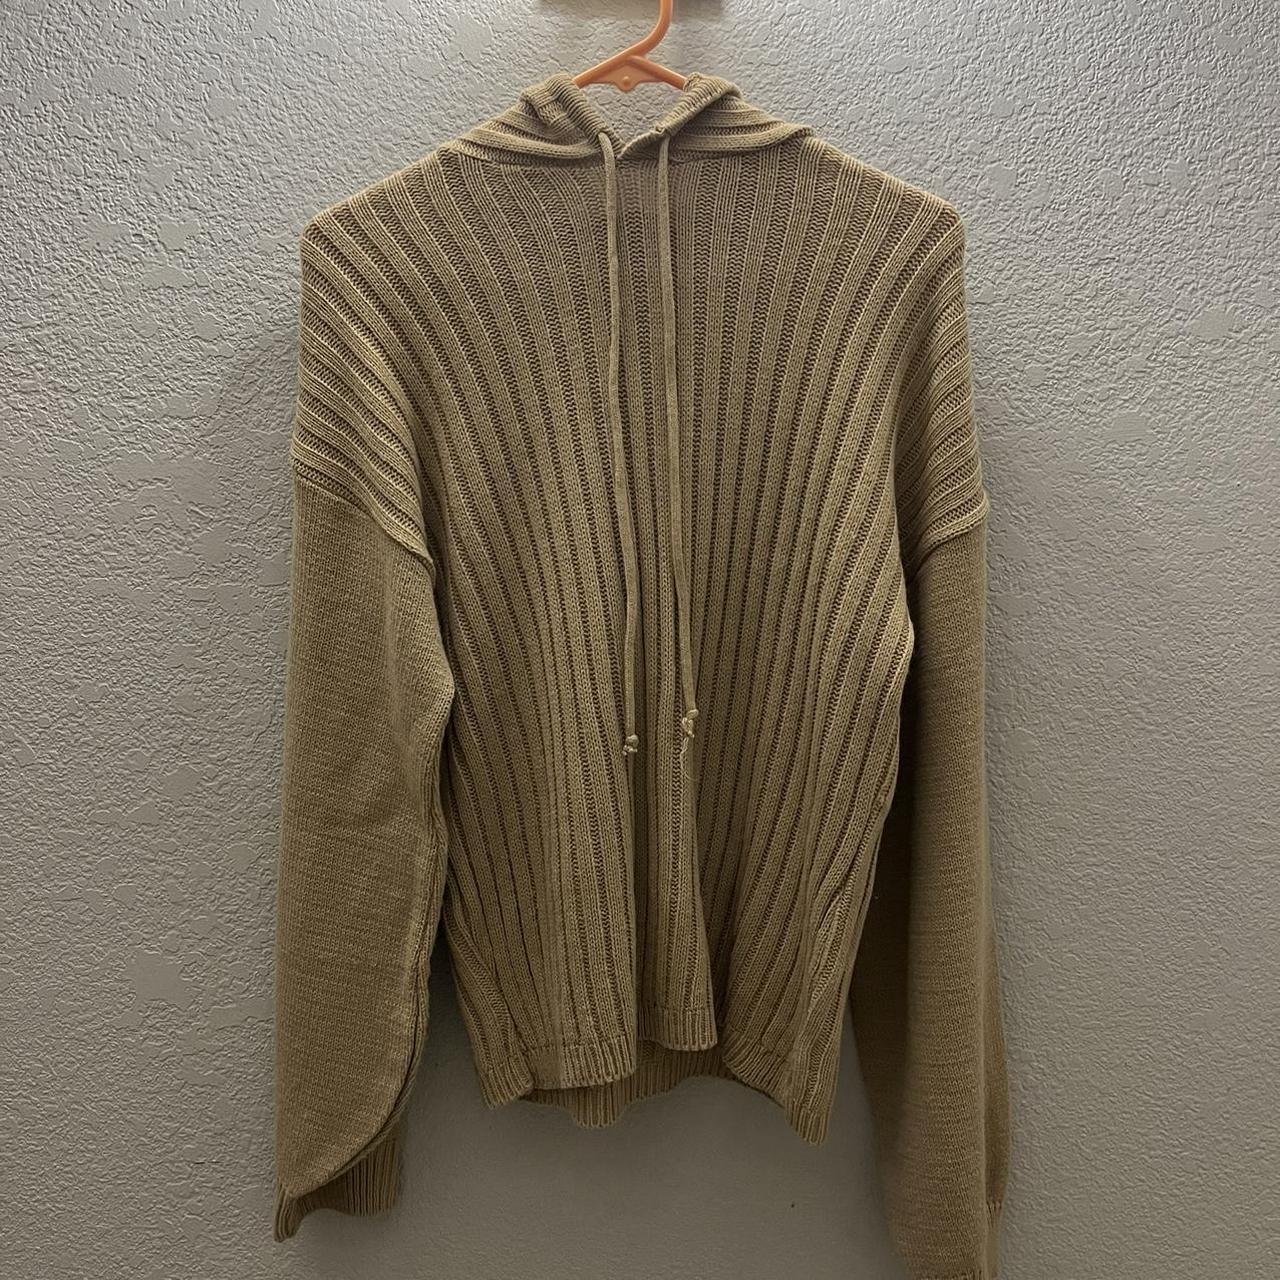 thin hoodie from ASOS - i cut the tag off but most... - Depop